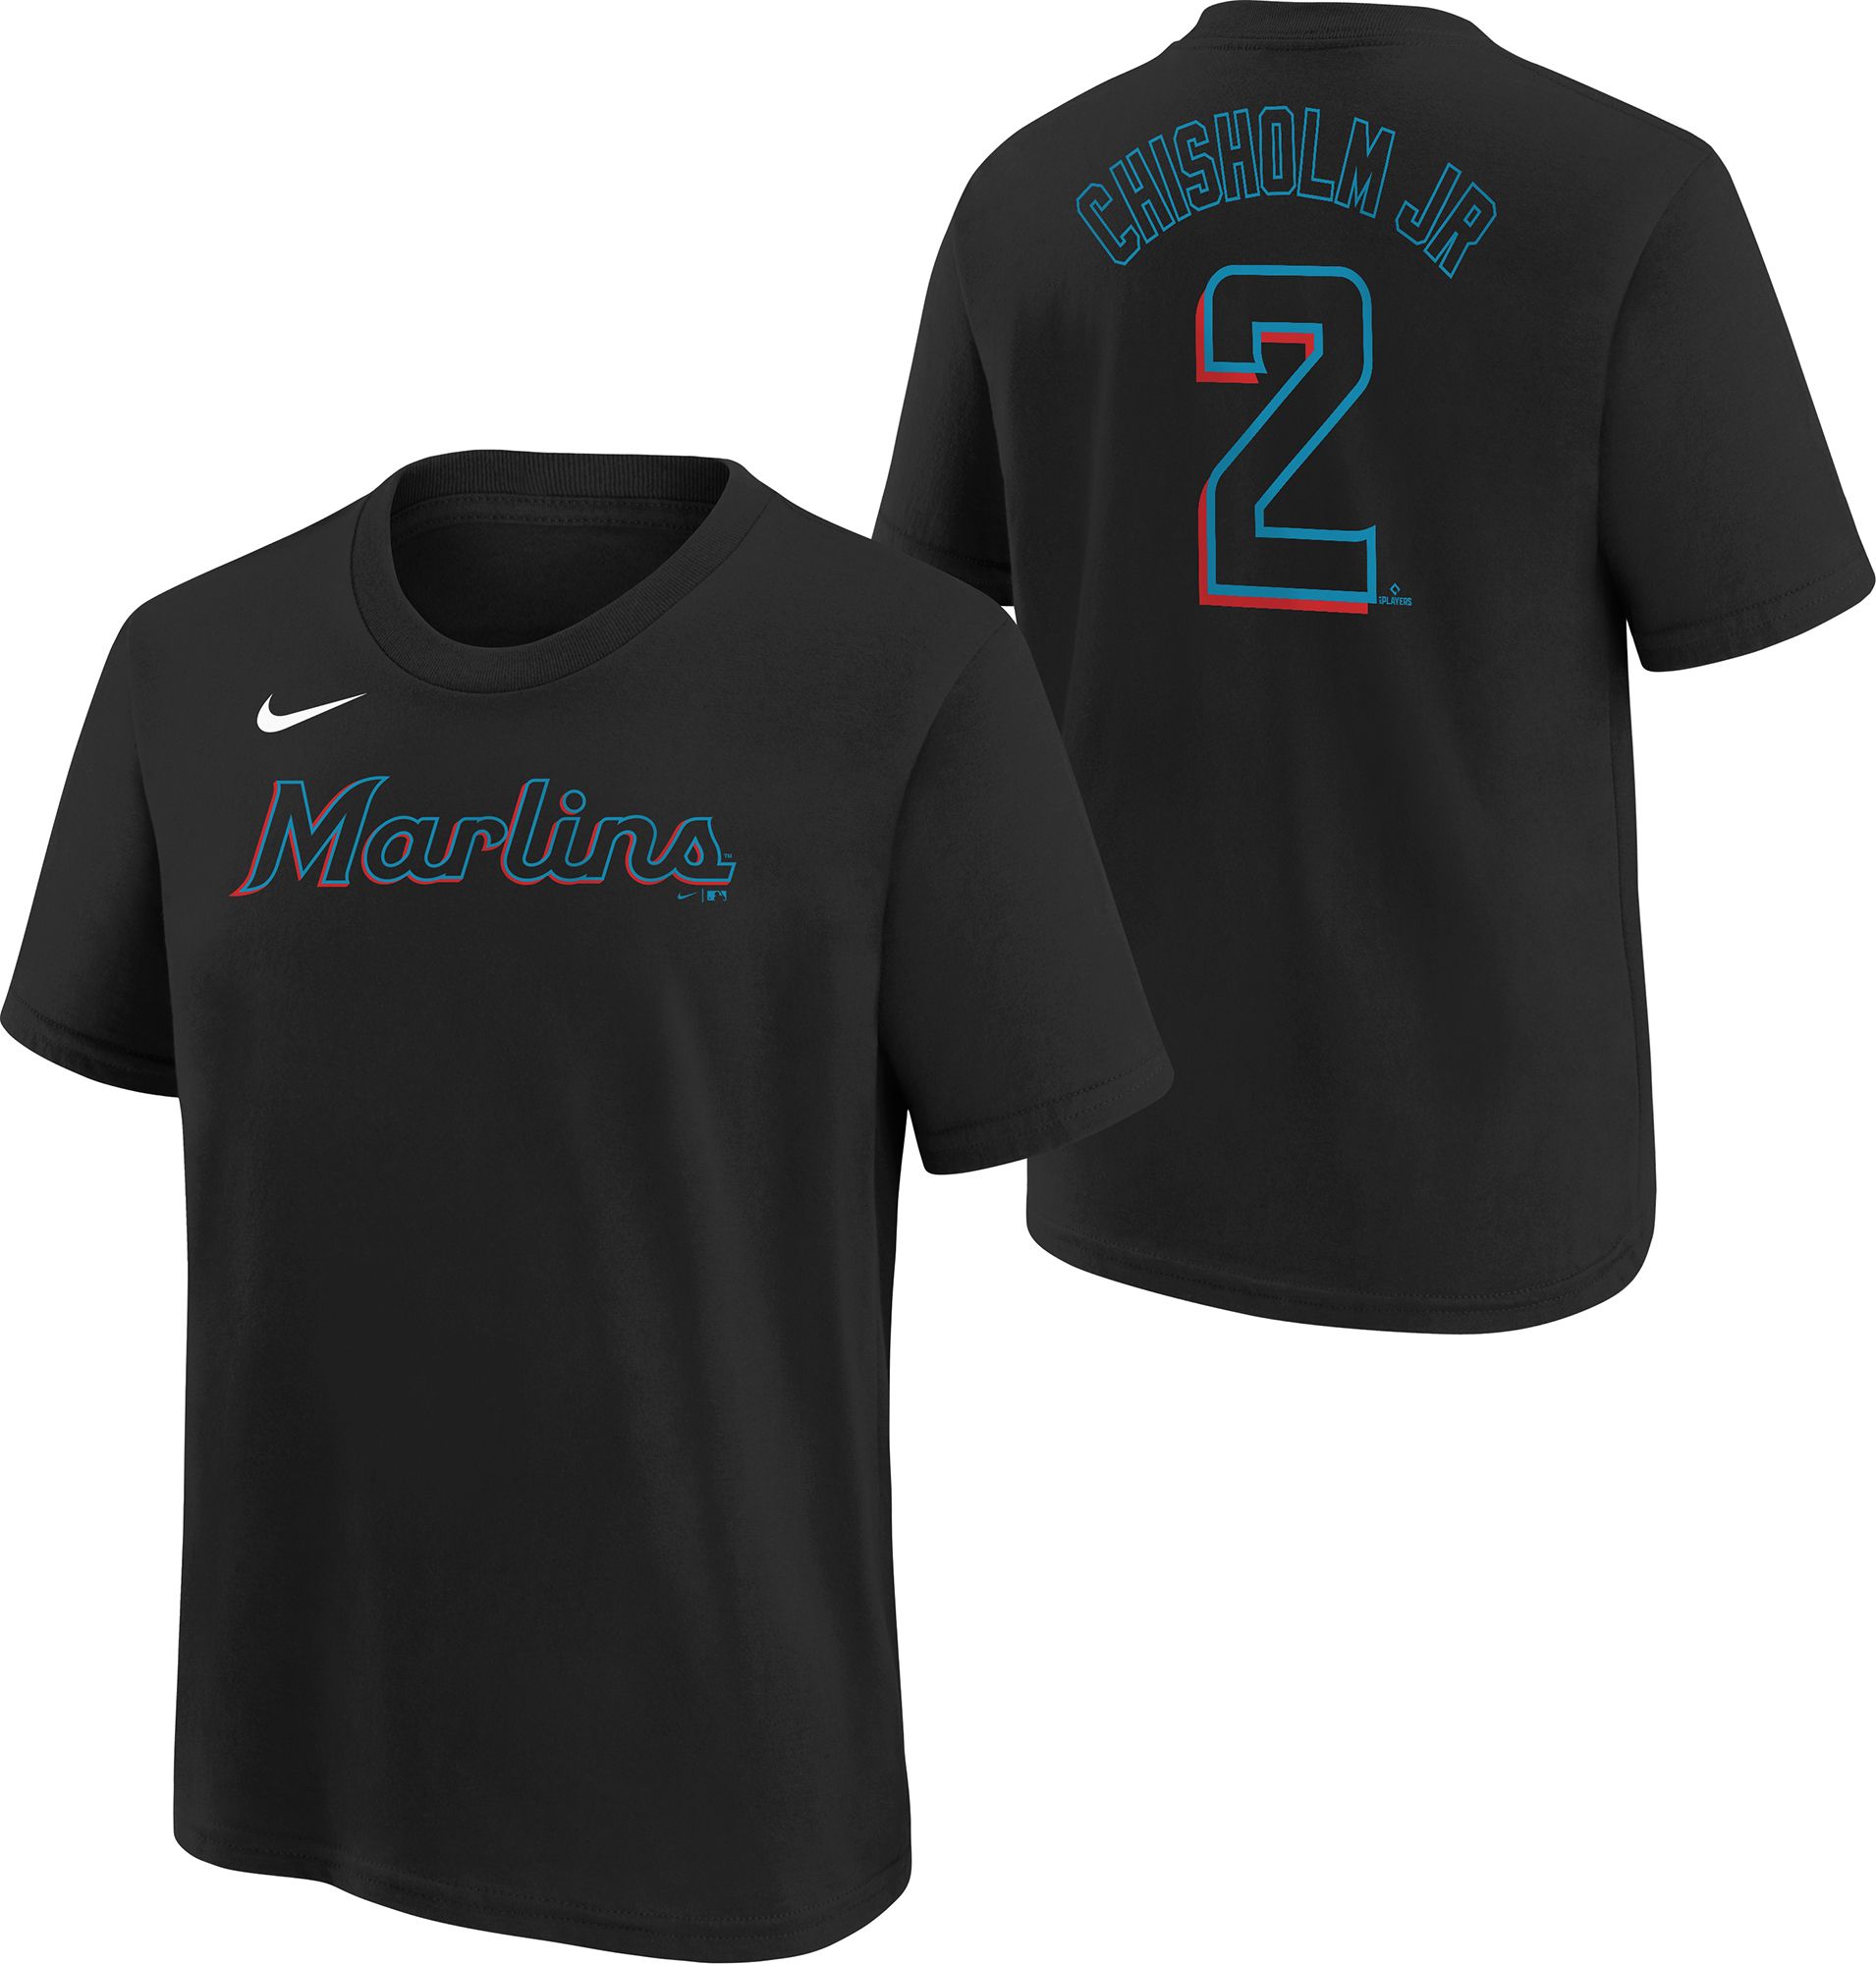 Jazz Chisholm Jr. Miami Marlins Women's City Connect Jersey by NIKE